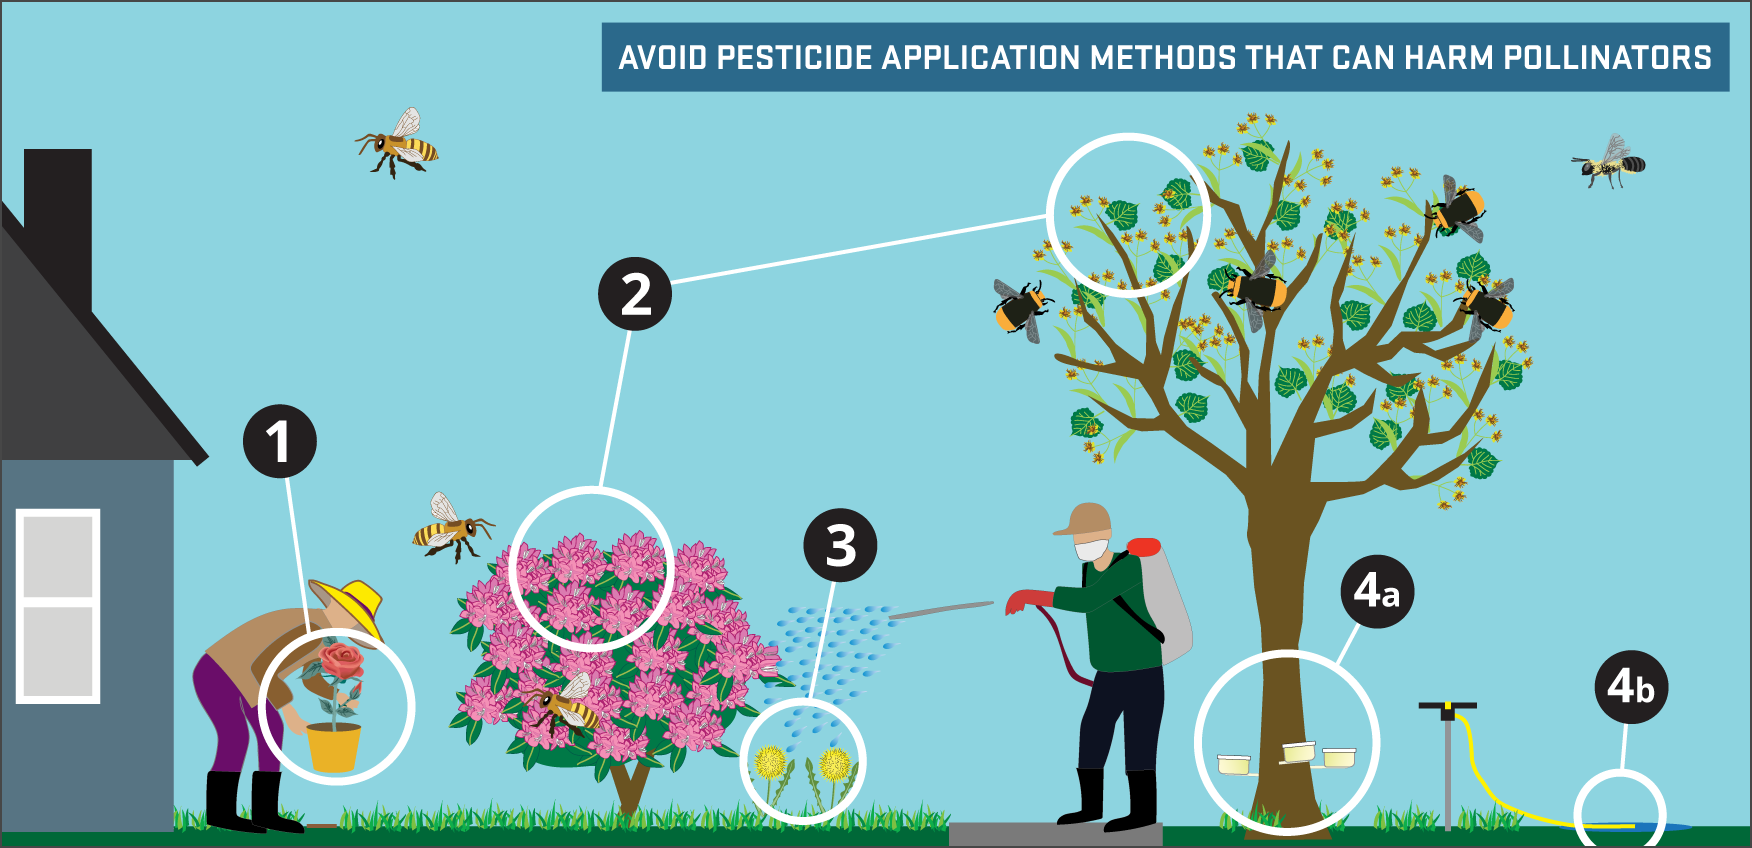 Infographic showing pesticide application methods that can harm pollinators (full text below)